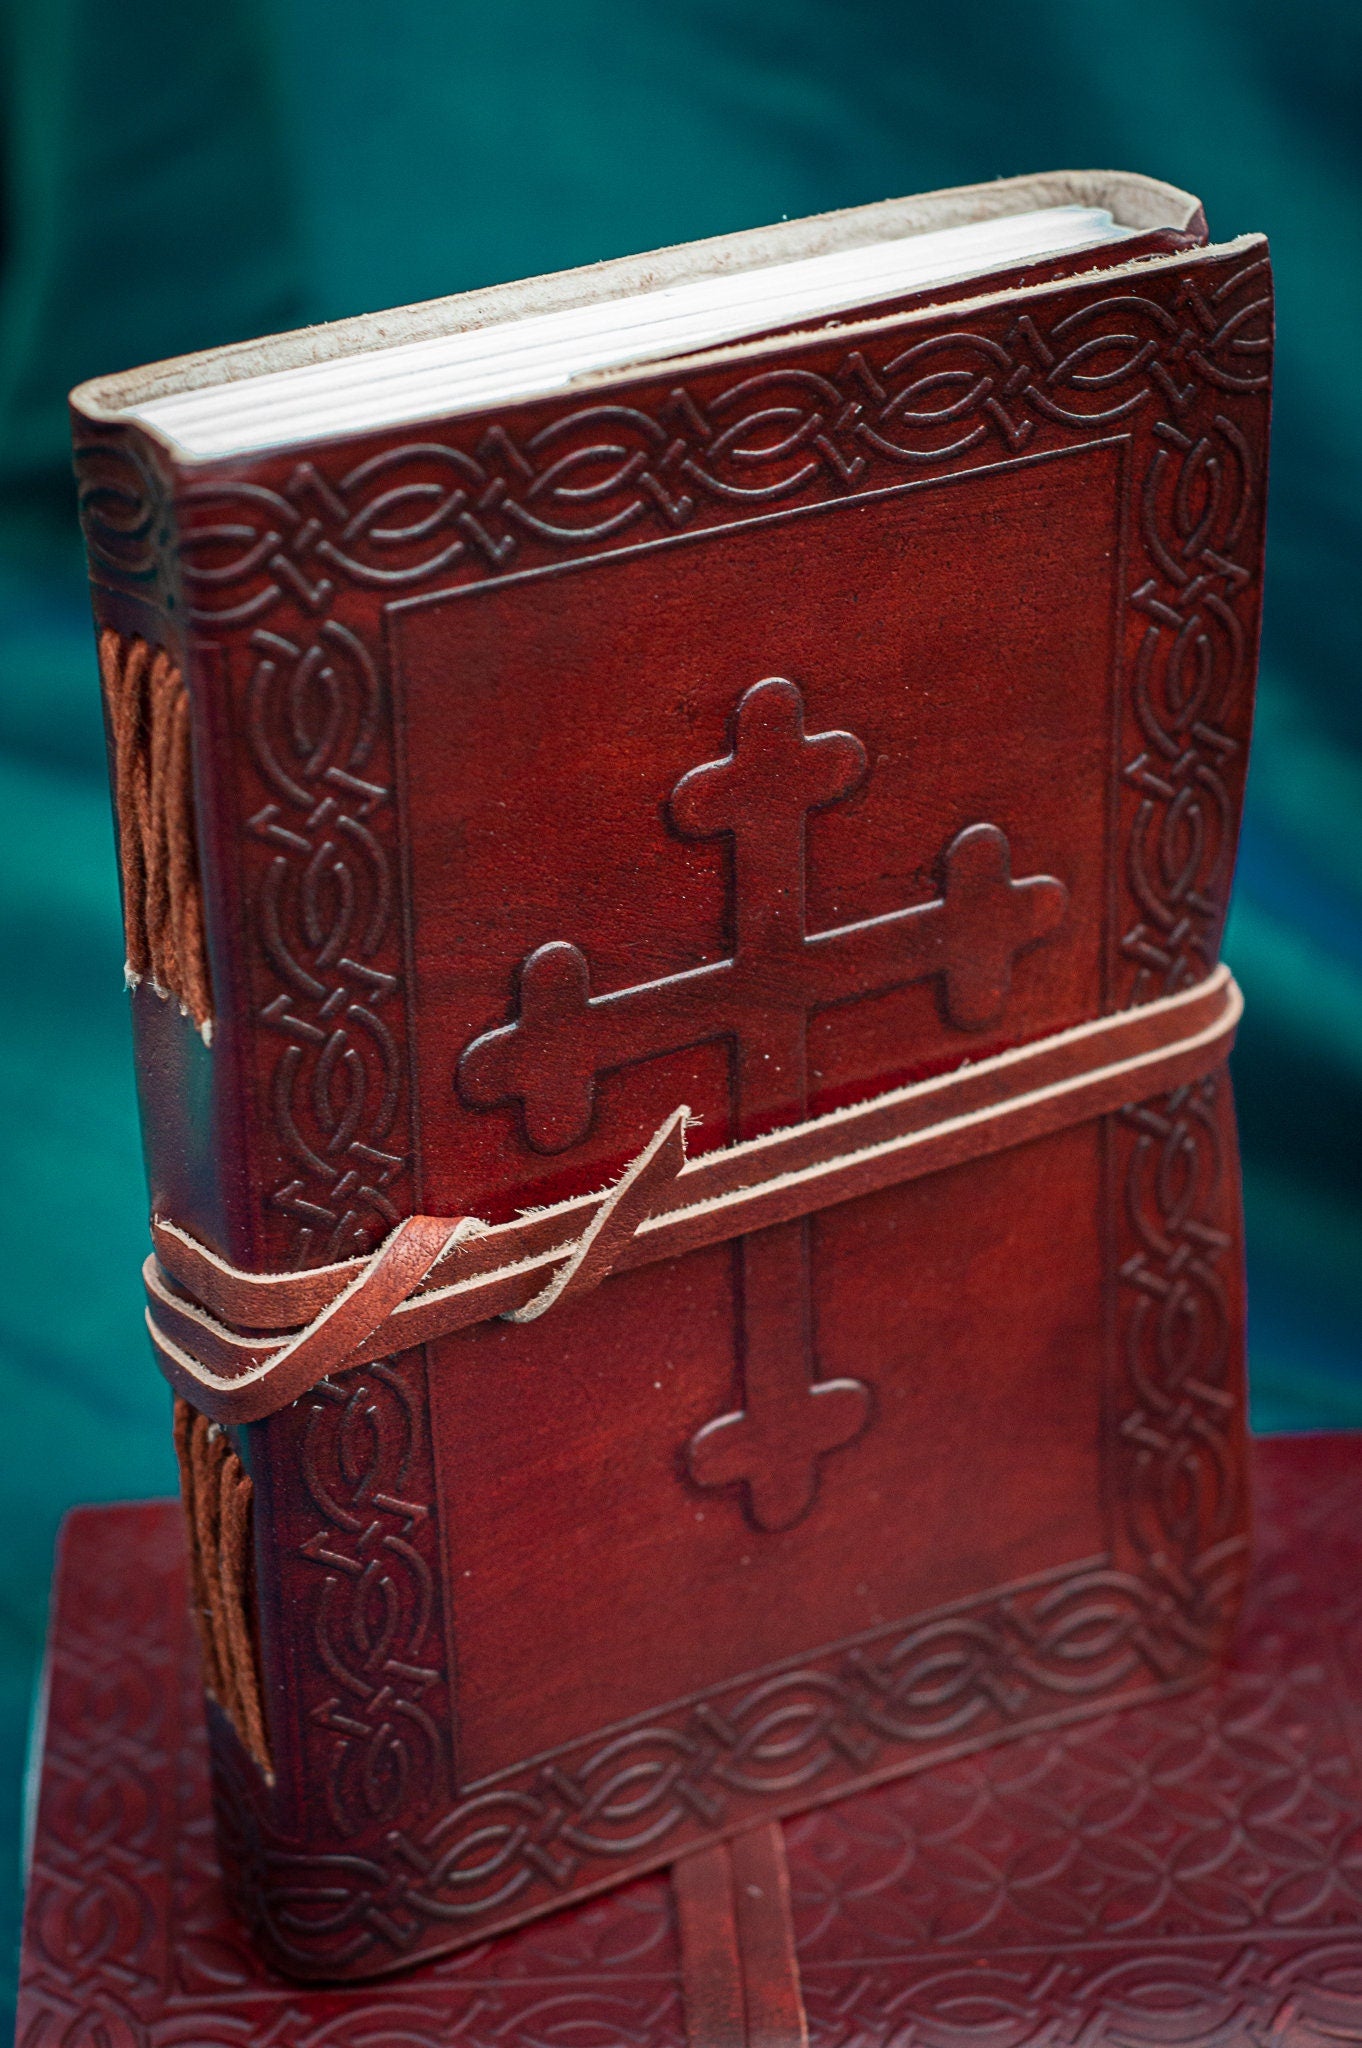 Red Leather Journal with Embossed Cross - bible journal